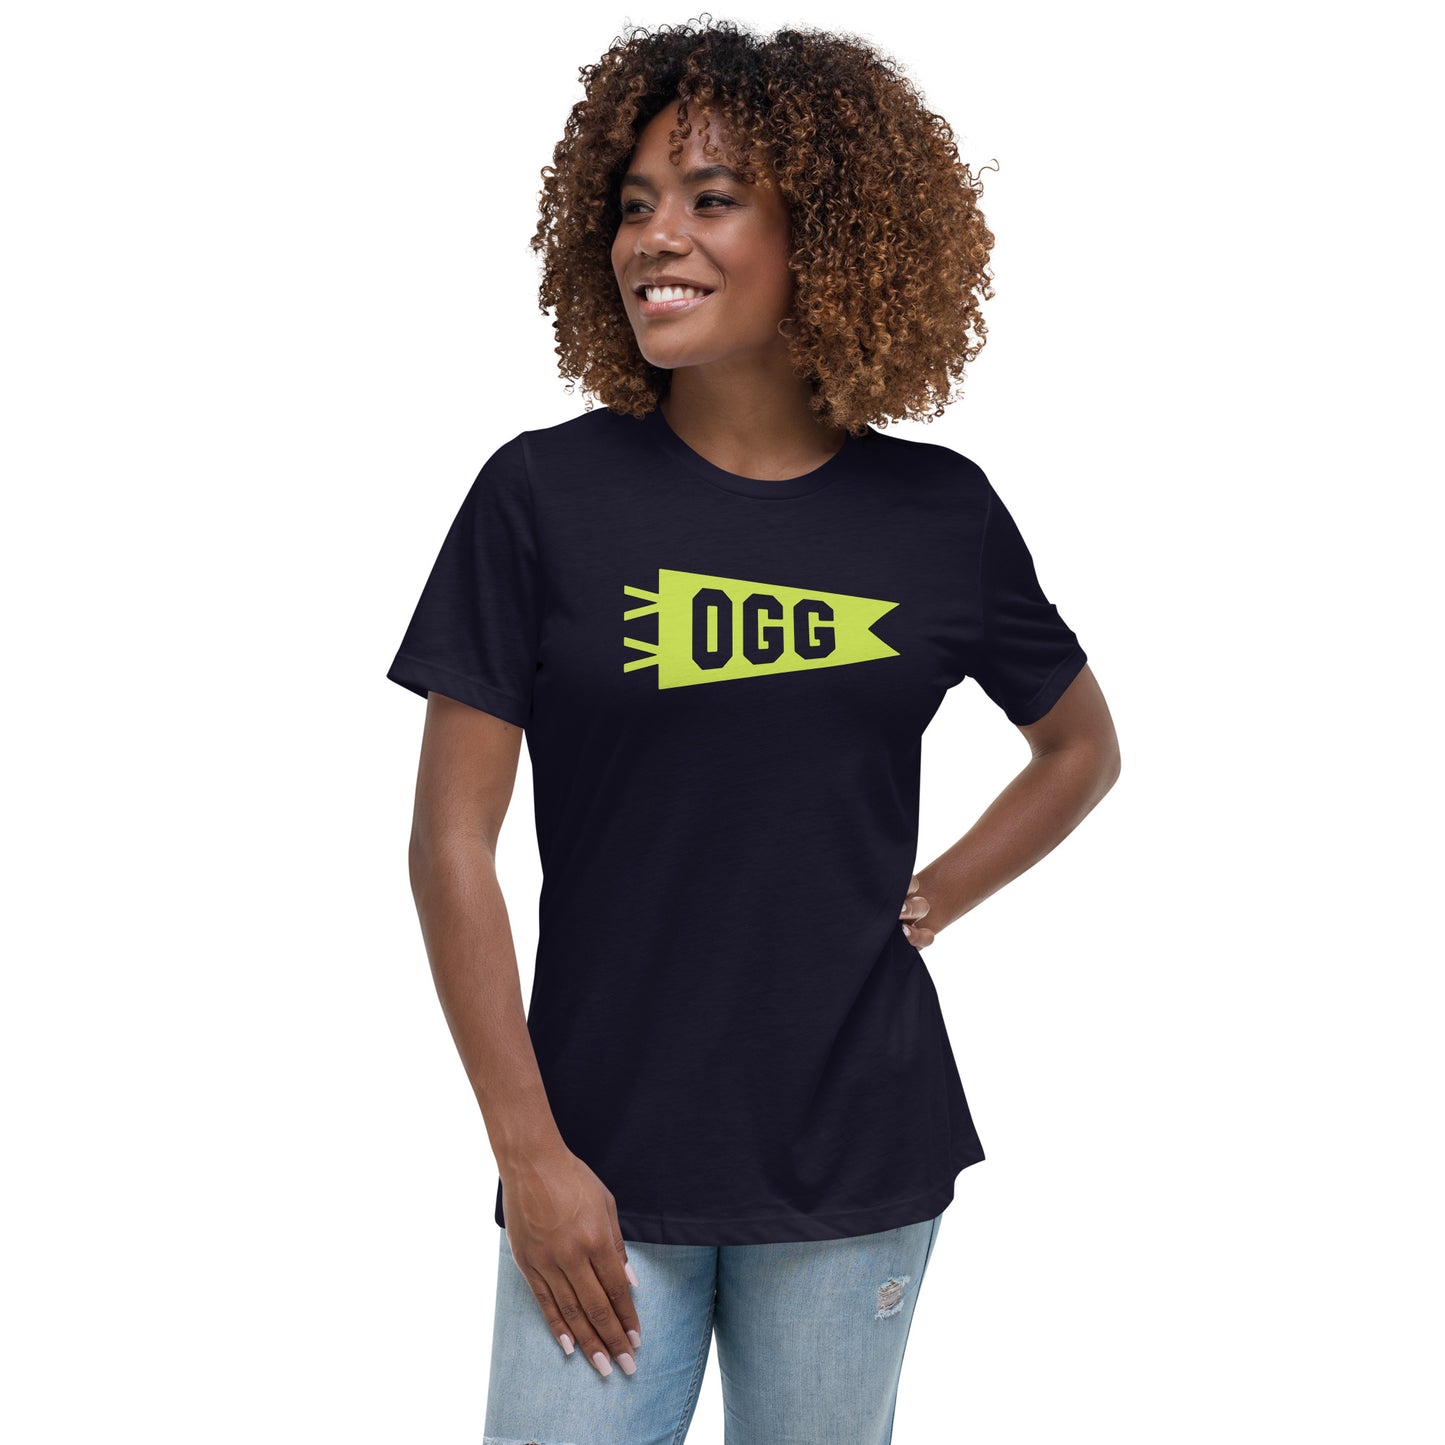 Airport Code Women's Tee - Green Graphic • OGG Maui • YHM Designs - Image 03